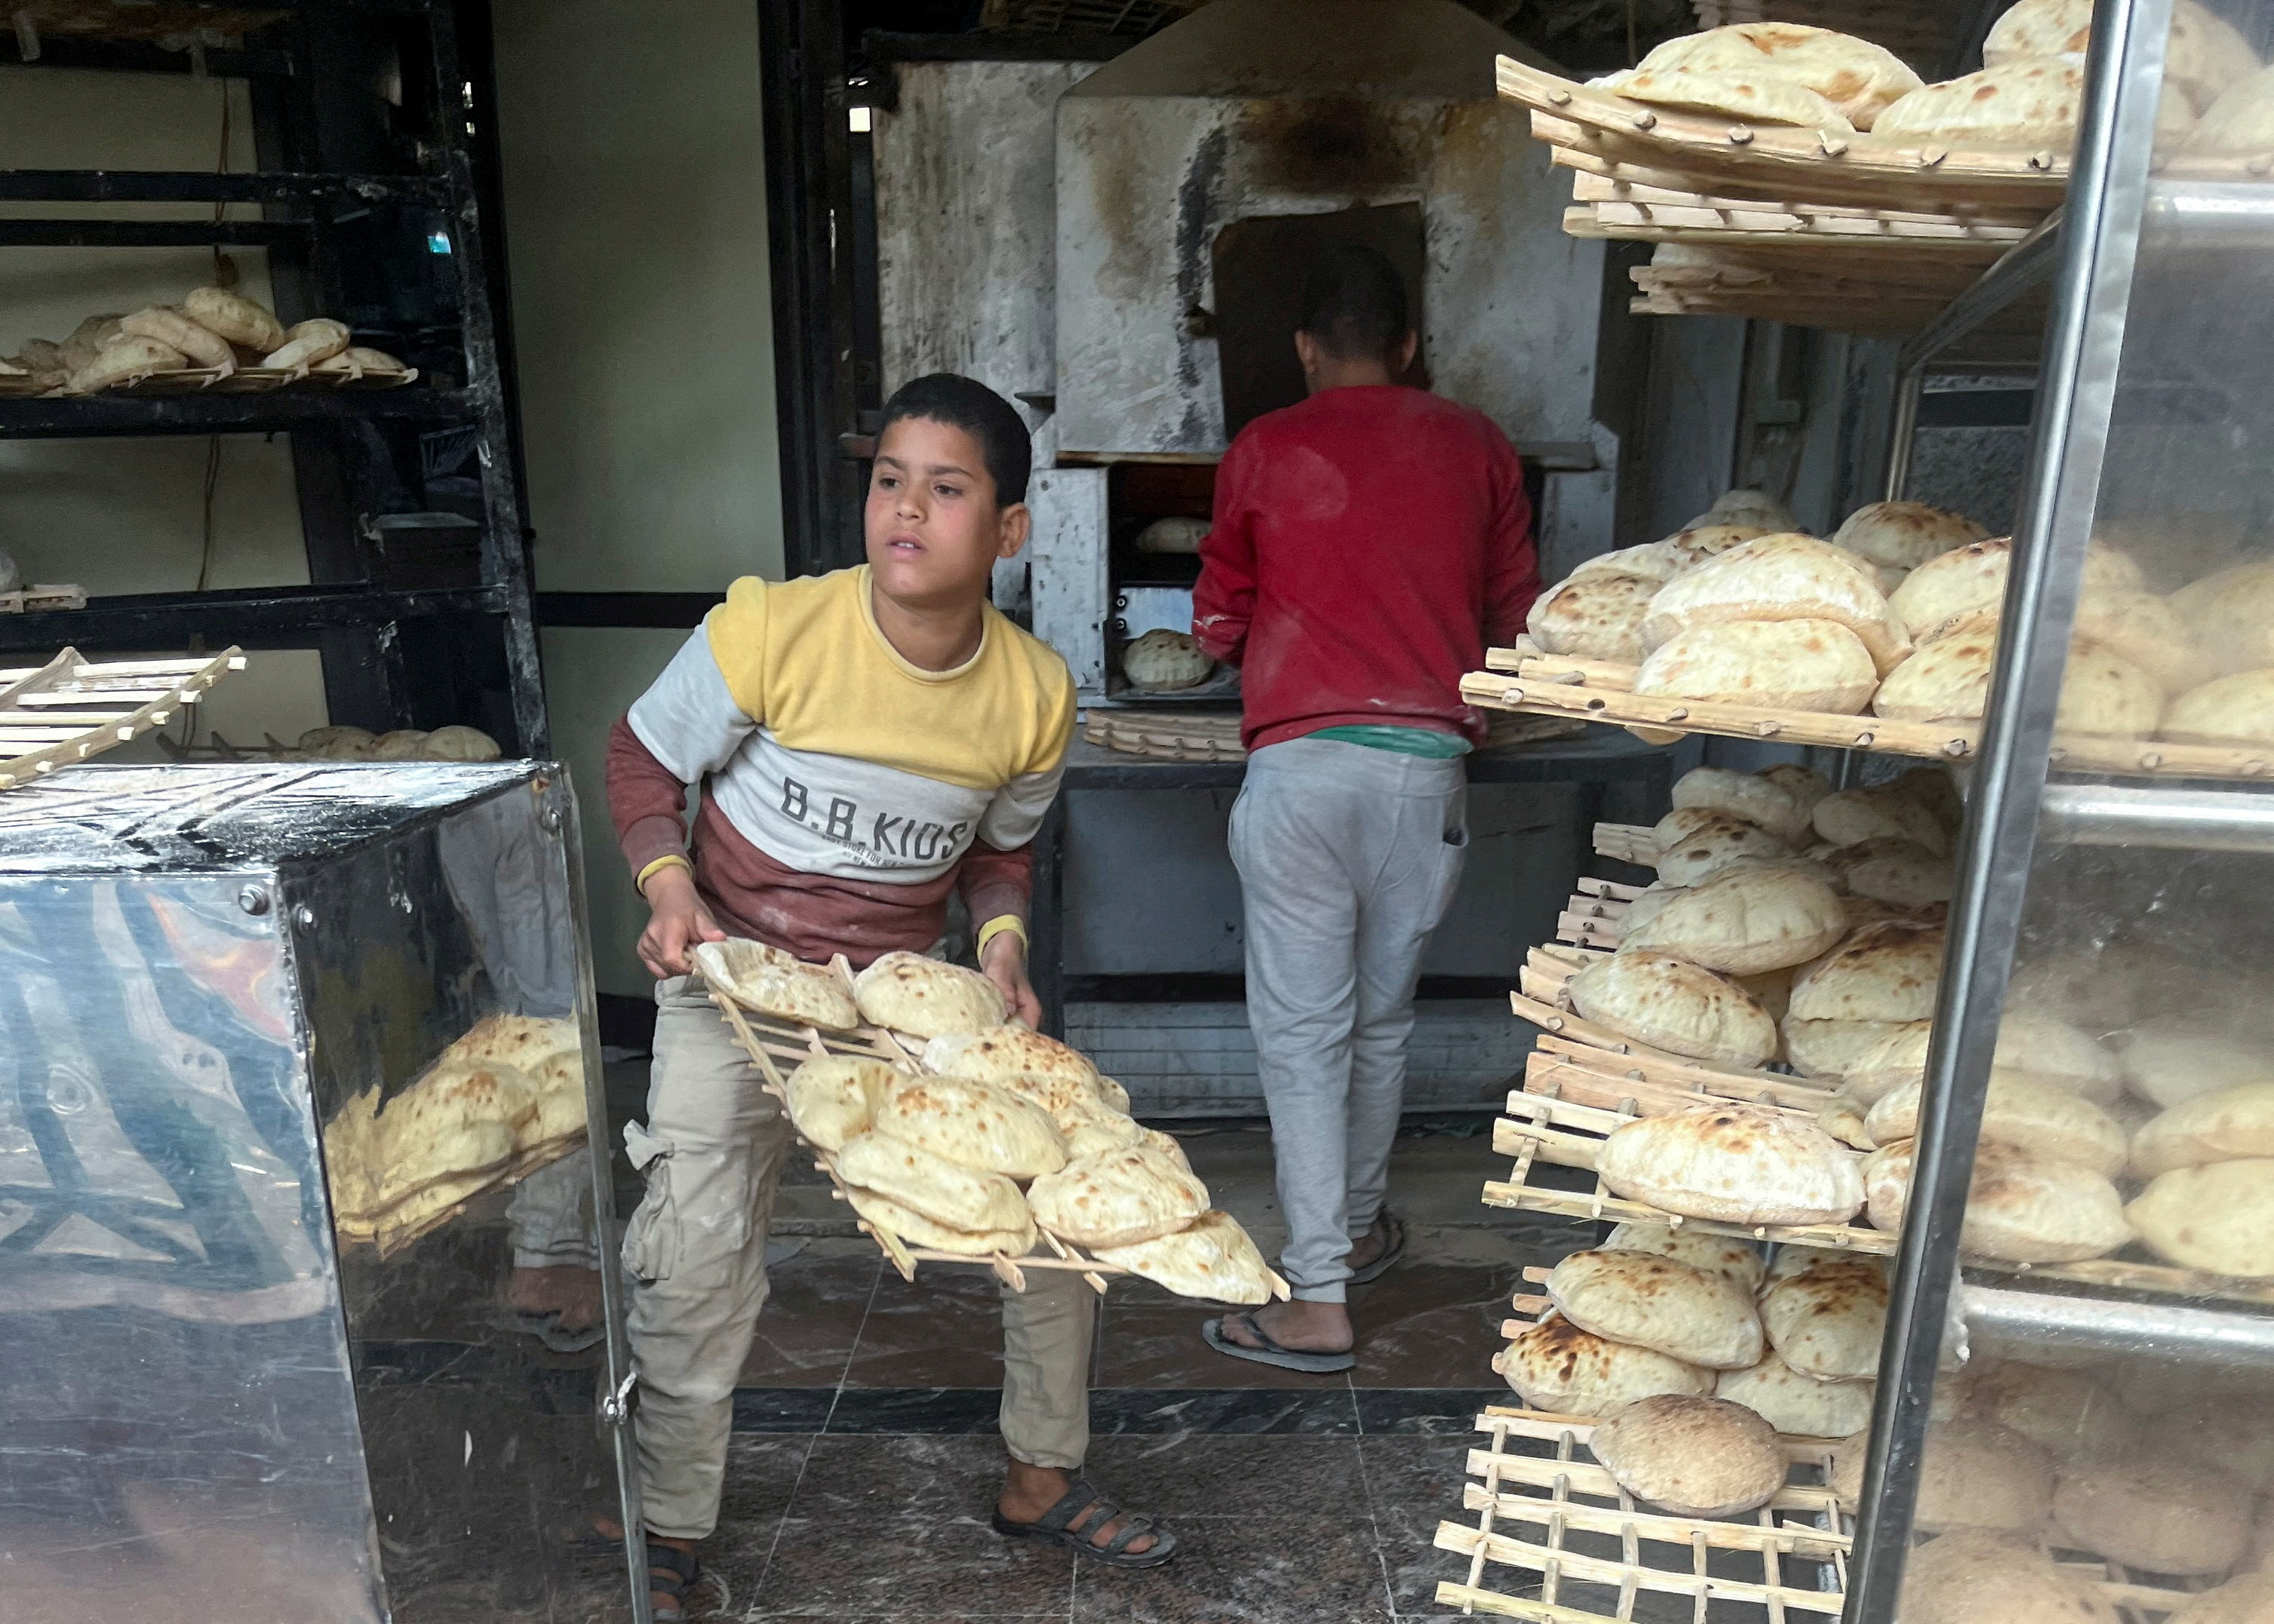 Employees arrange bread for sale at a bakery in Maadi, a suburb of Cairo